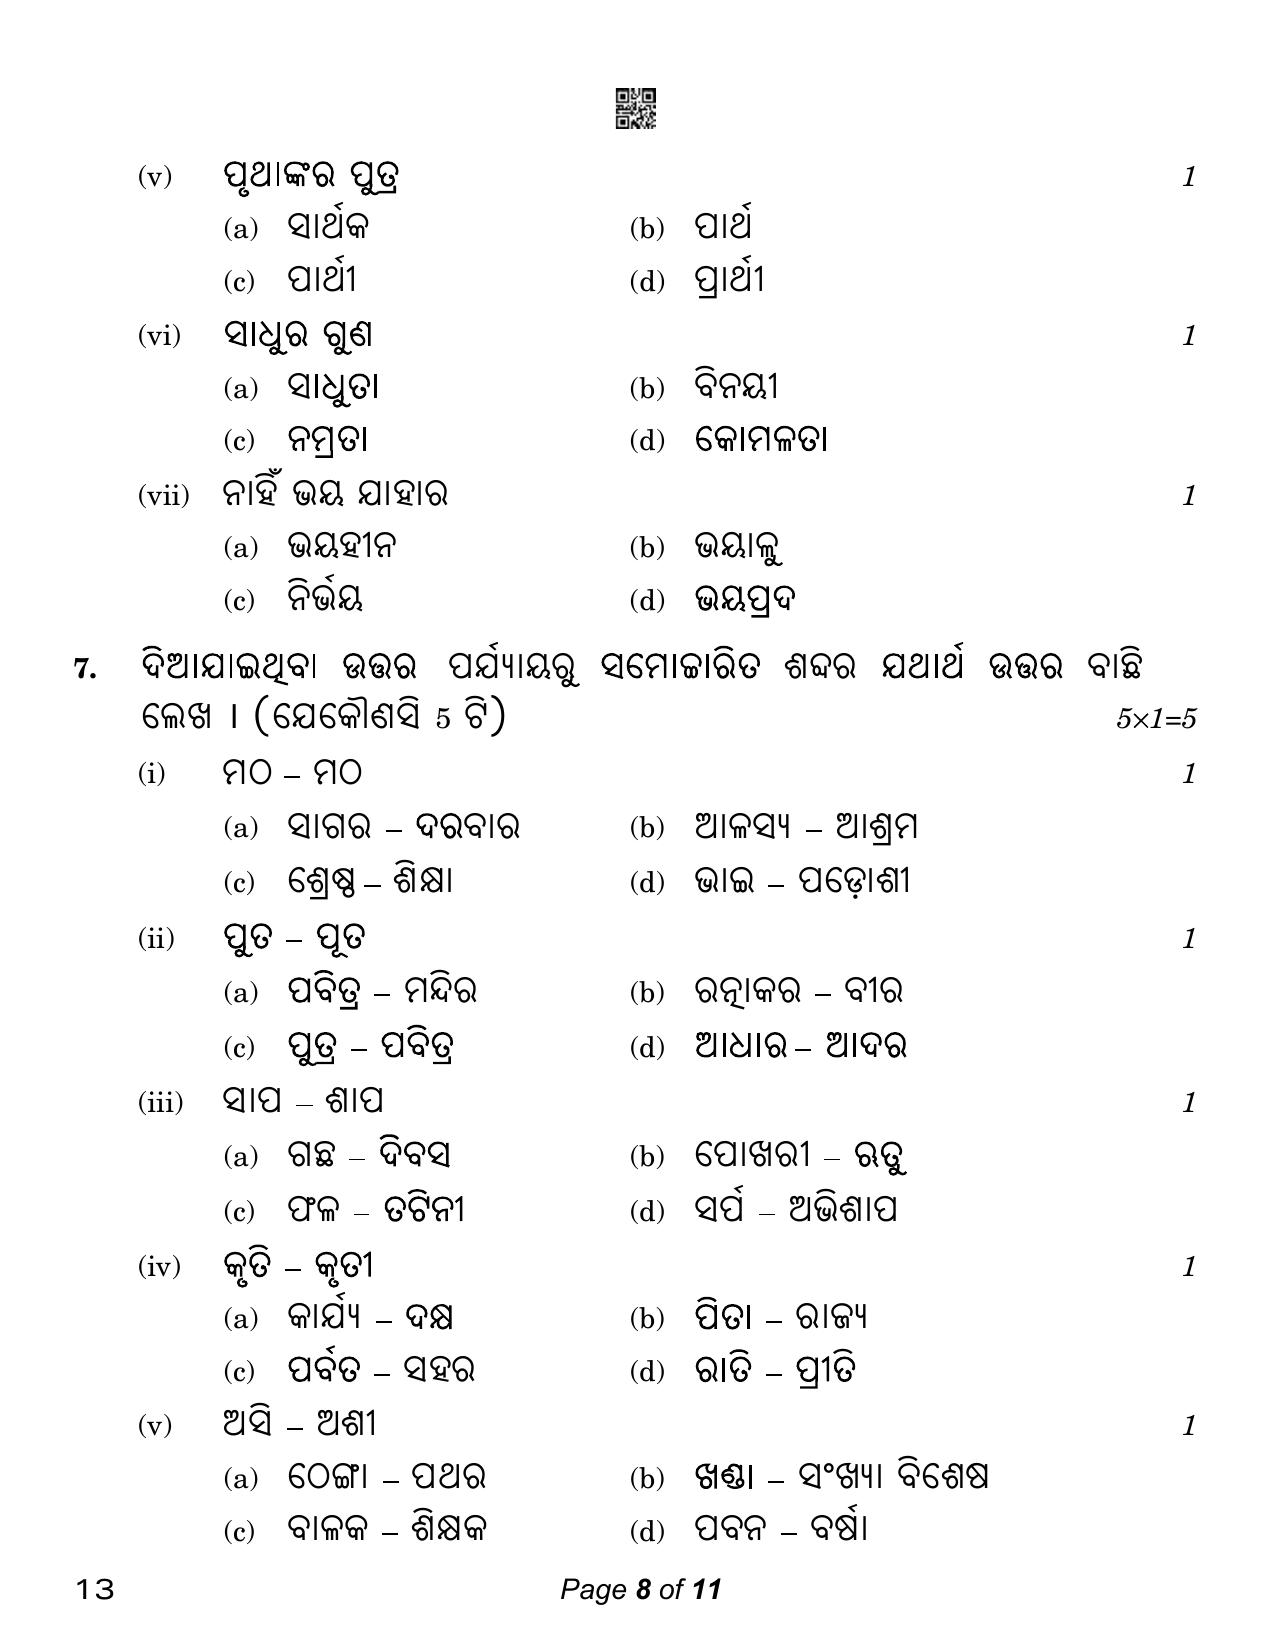 CBSE Class 12 Odia (Compartment) 2023 Question Paper - Page 8